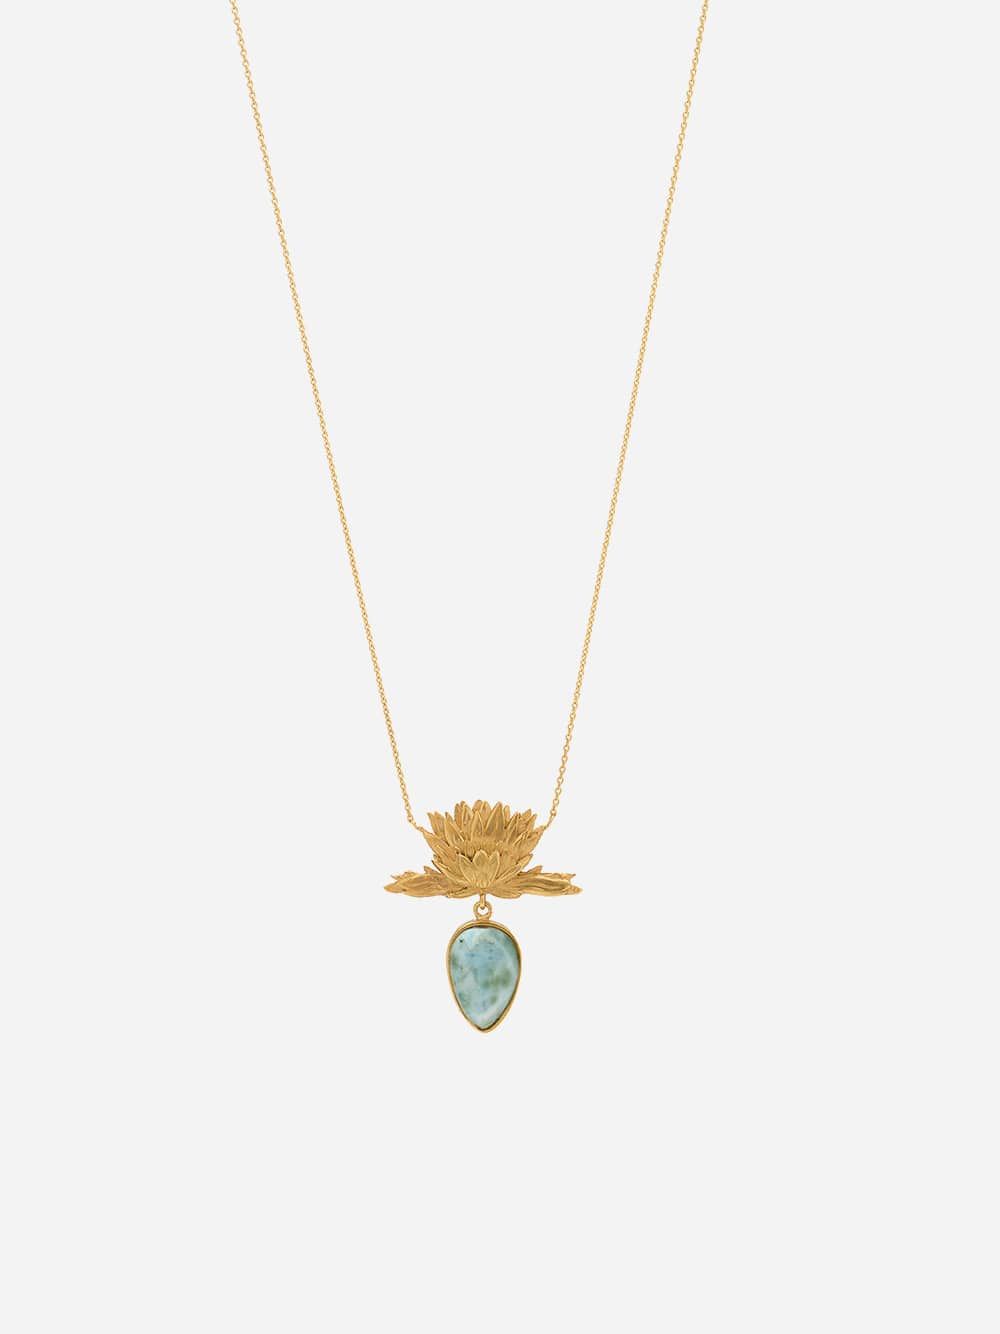 Water Lilly Necklace | Sopro